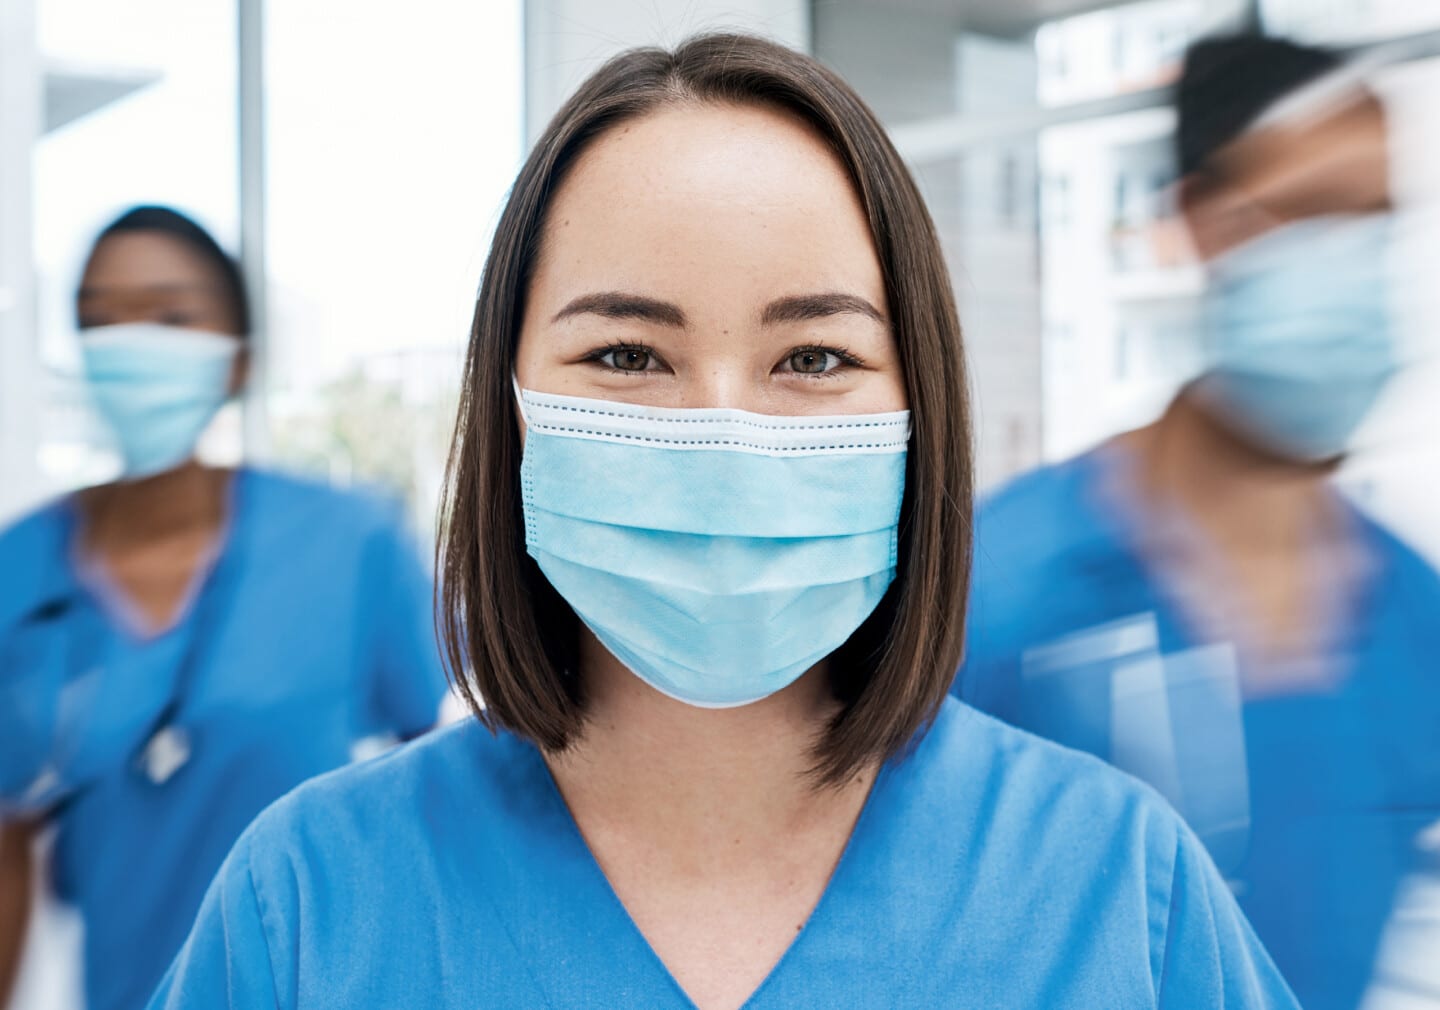 Portrait of a doctor wearing a face mask in a busy hospital.